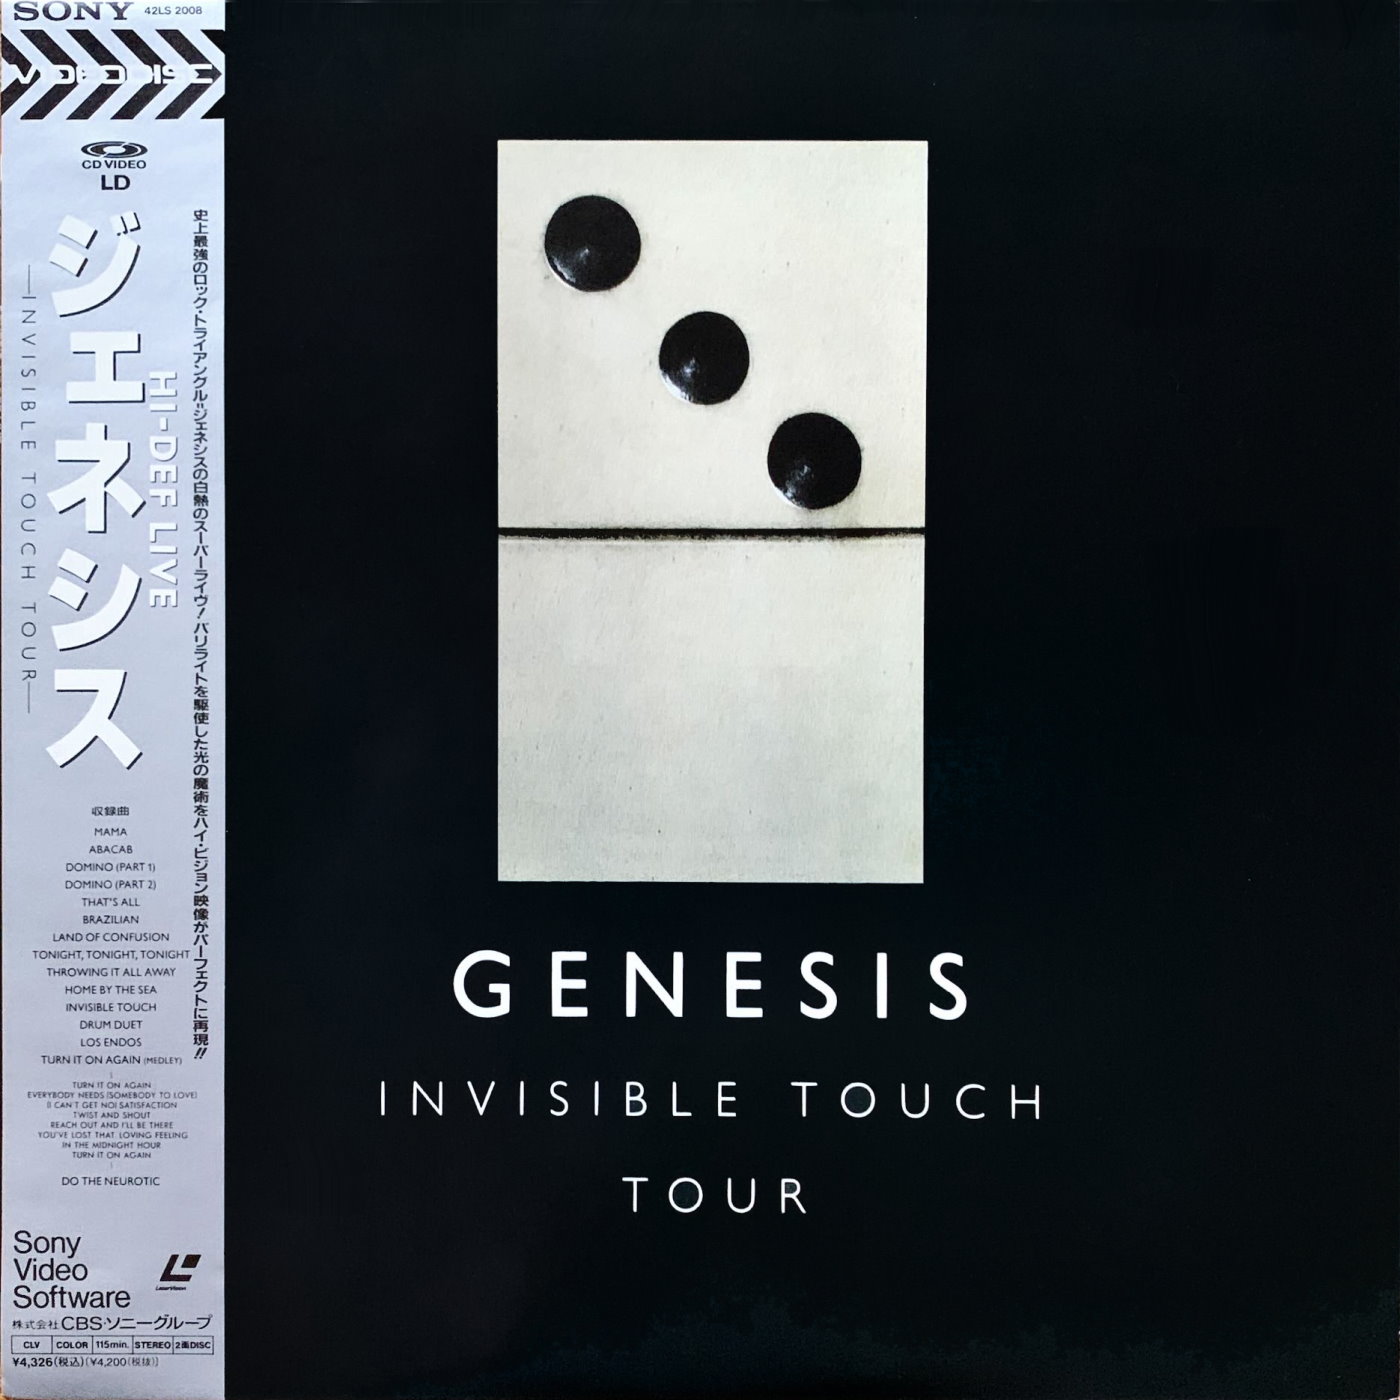 Cover - Genesis - Invisible Touch Tour.jpg